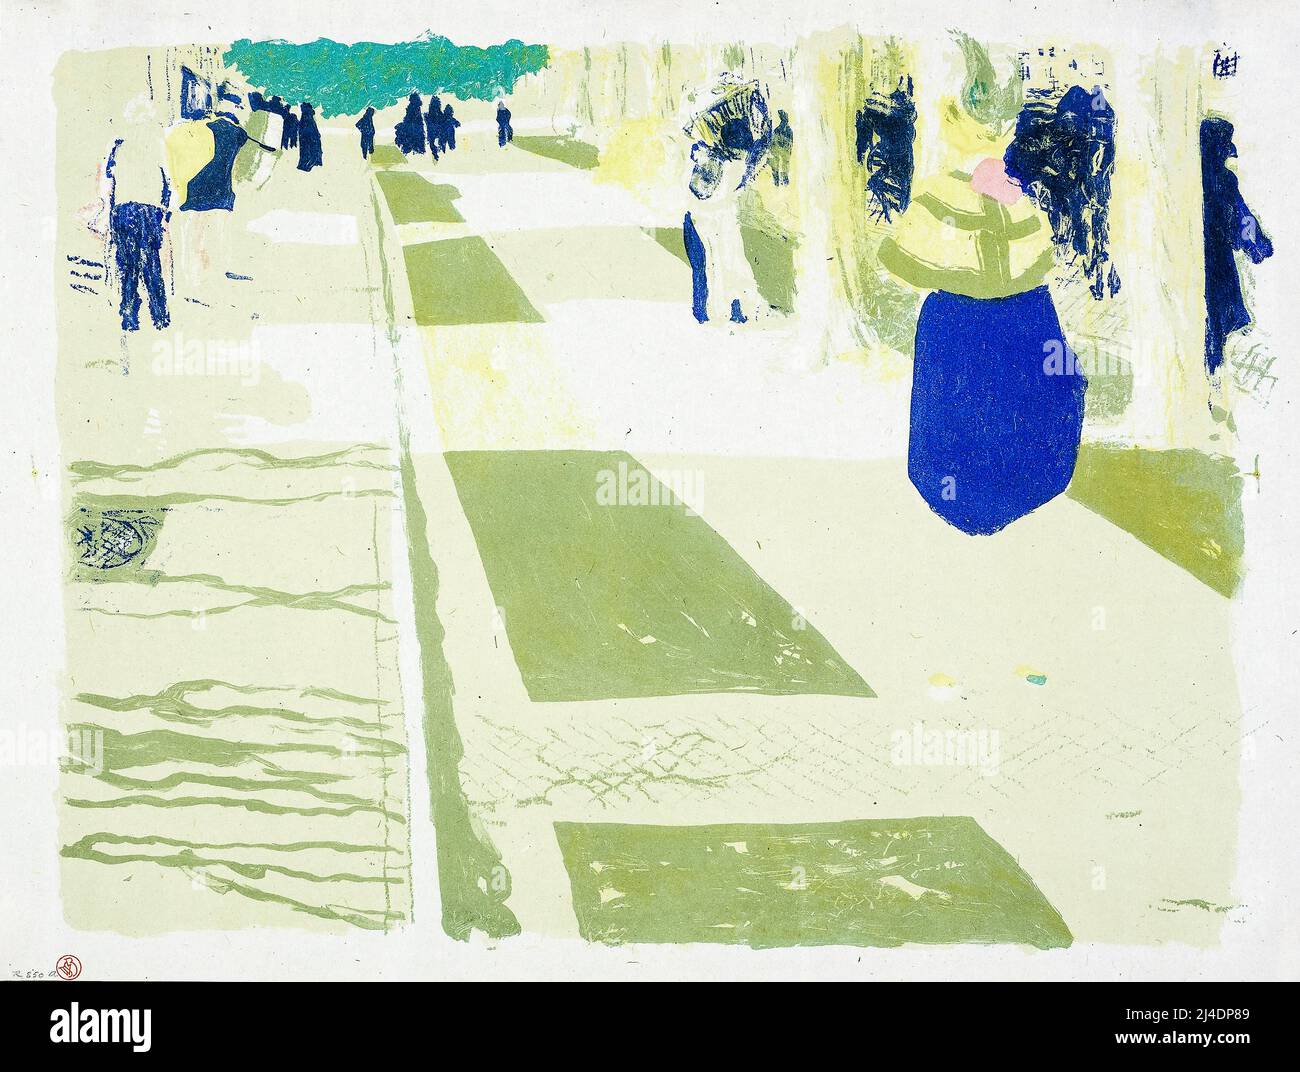 Édouard Vuillard, The Avenue (from Landscapes and Interiors), lithographic print, 1899 Stock Photo